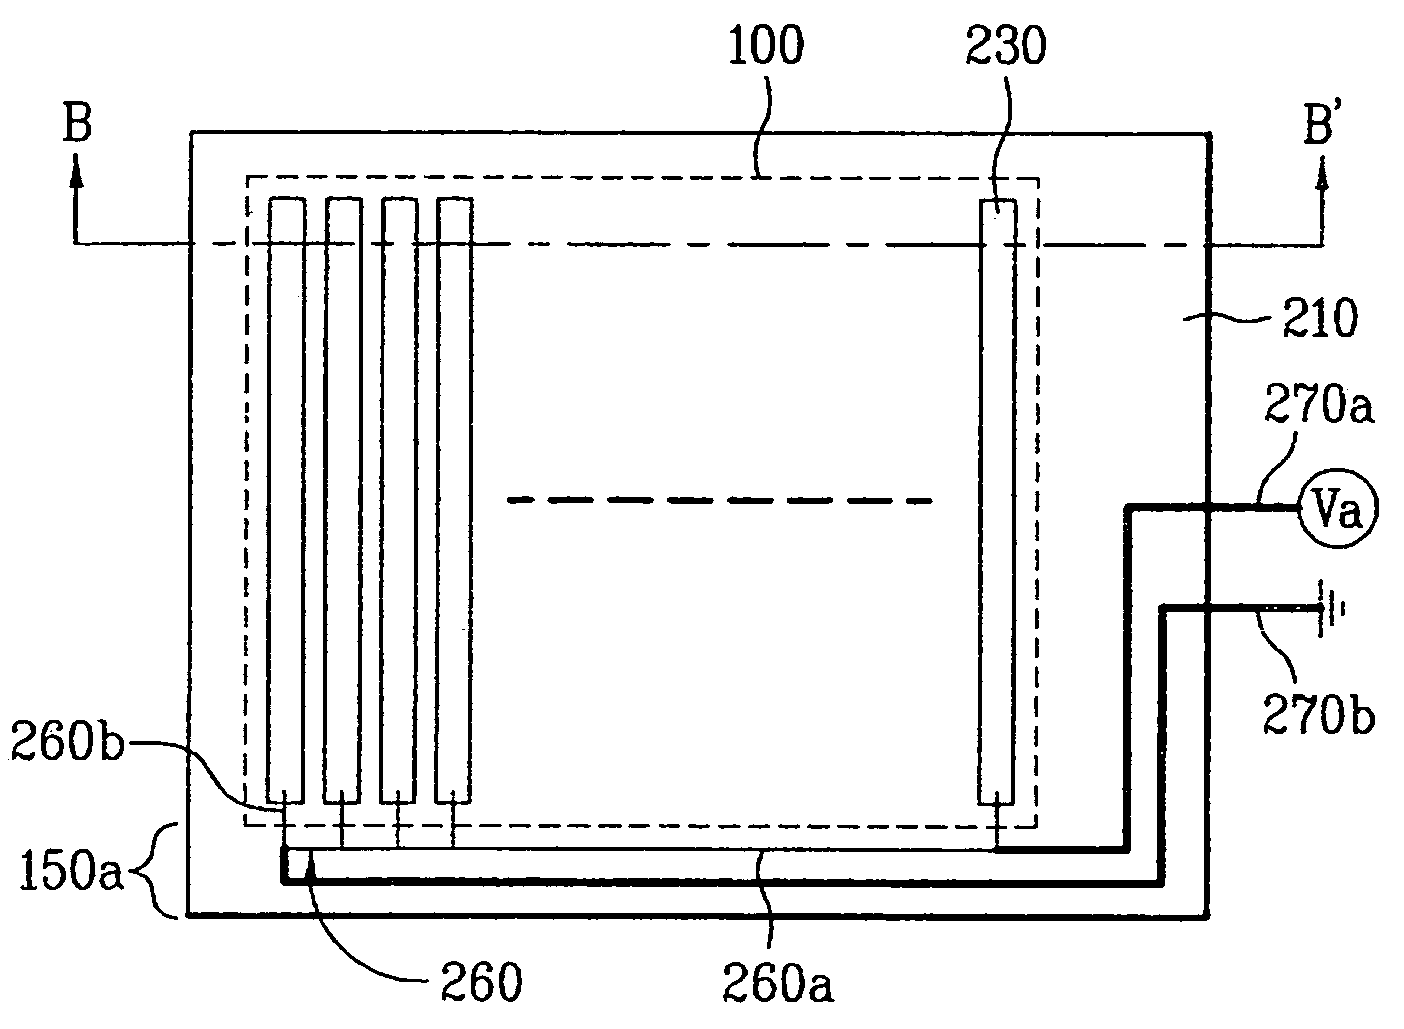 Digital resistive-type touch panel